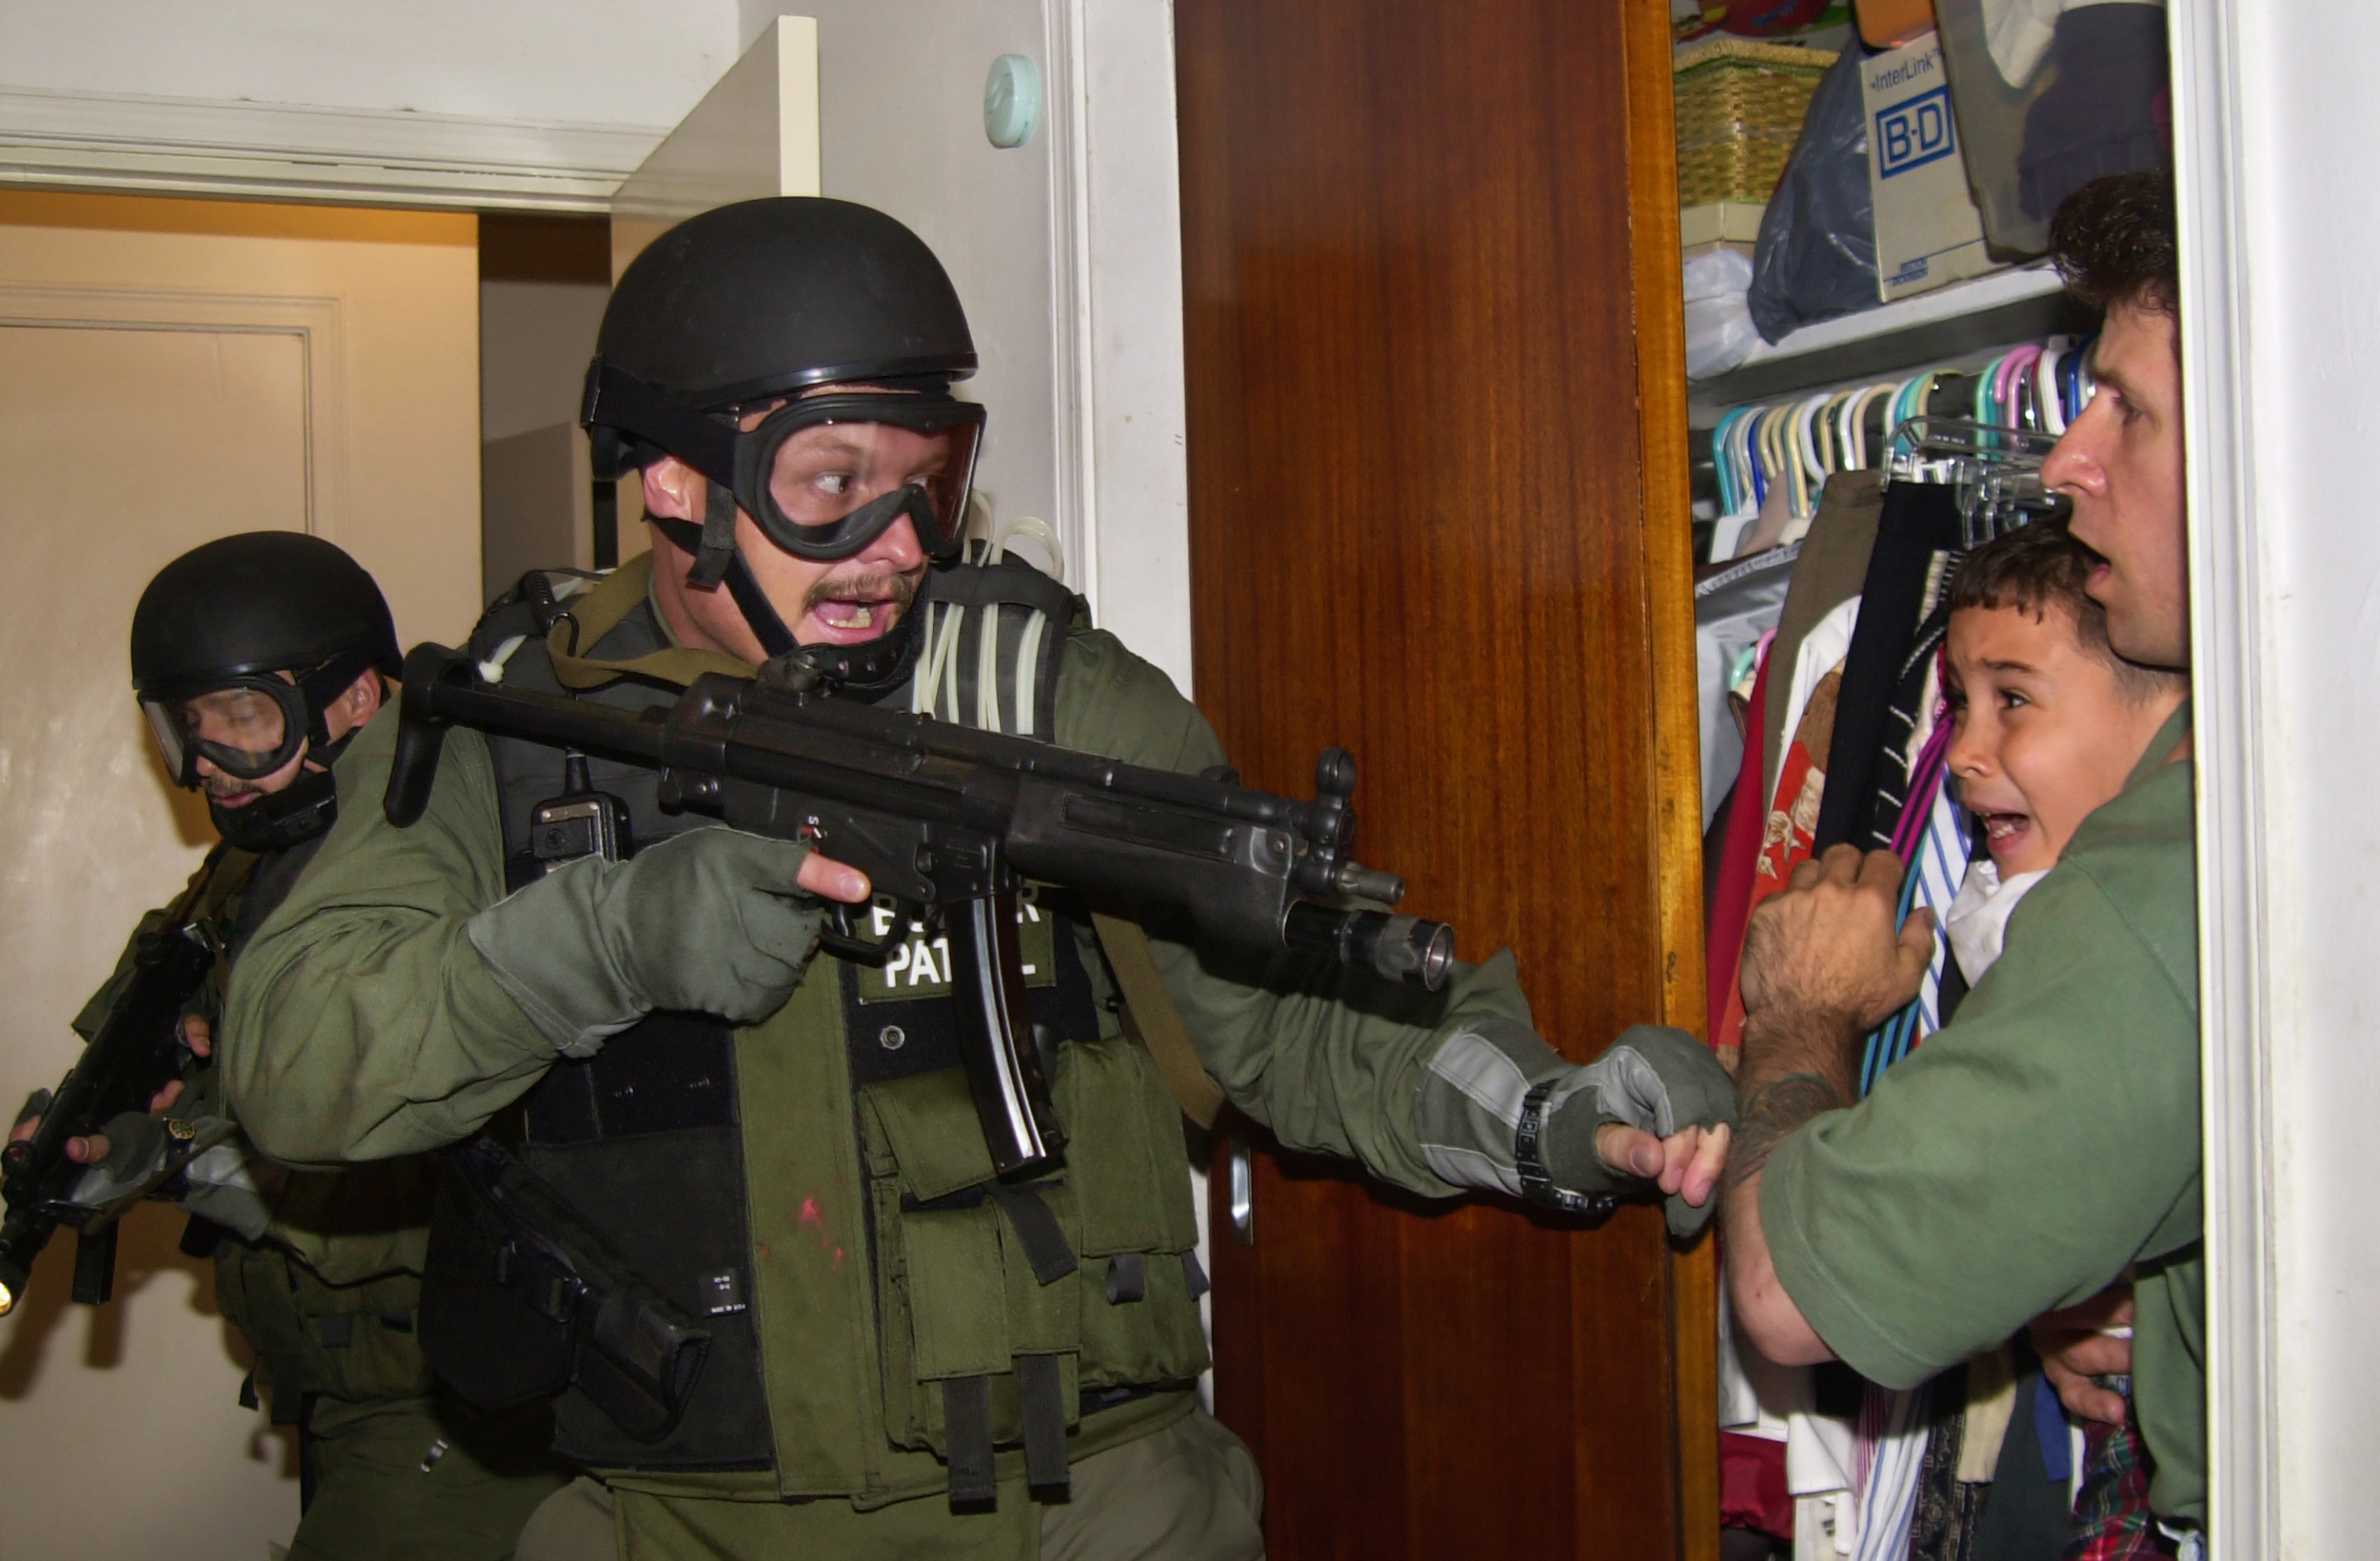 2001:  Alan Diaz – “The Taking of Elian.”  U.S. federal agents burst through the door of a Miami home on April 22, 2000, as they seize a Cuban boy named Elian Gonzalez.  Elian was hiding in a closet with Donato Dalrymple, one of two men who had rescued him from a raft off the Florida coast months earlier.  Elian’s U.S. based relatives lost a bitter legal battle with U.S. officials to prevent Elian from being returned to his father in Cuba.  The Gonzalez family allowed photographer Alan Diaz to wait for the raid with Dalrymple and the boy.